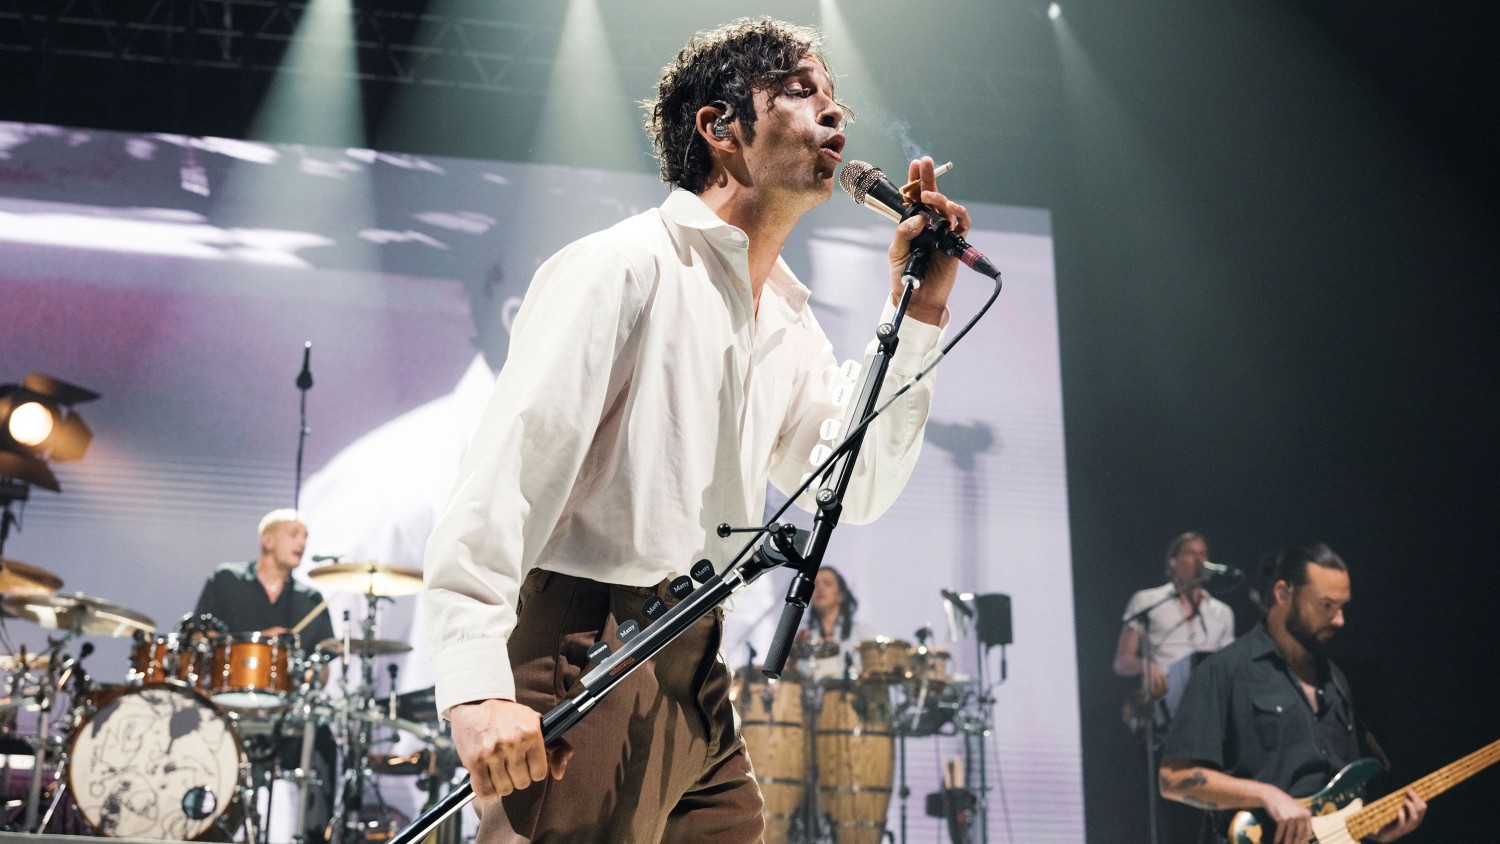 Matty Healy of The 1975 seen performing earlier this year at a concert in Paris. Kristy Sparow/Getty Images